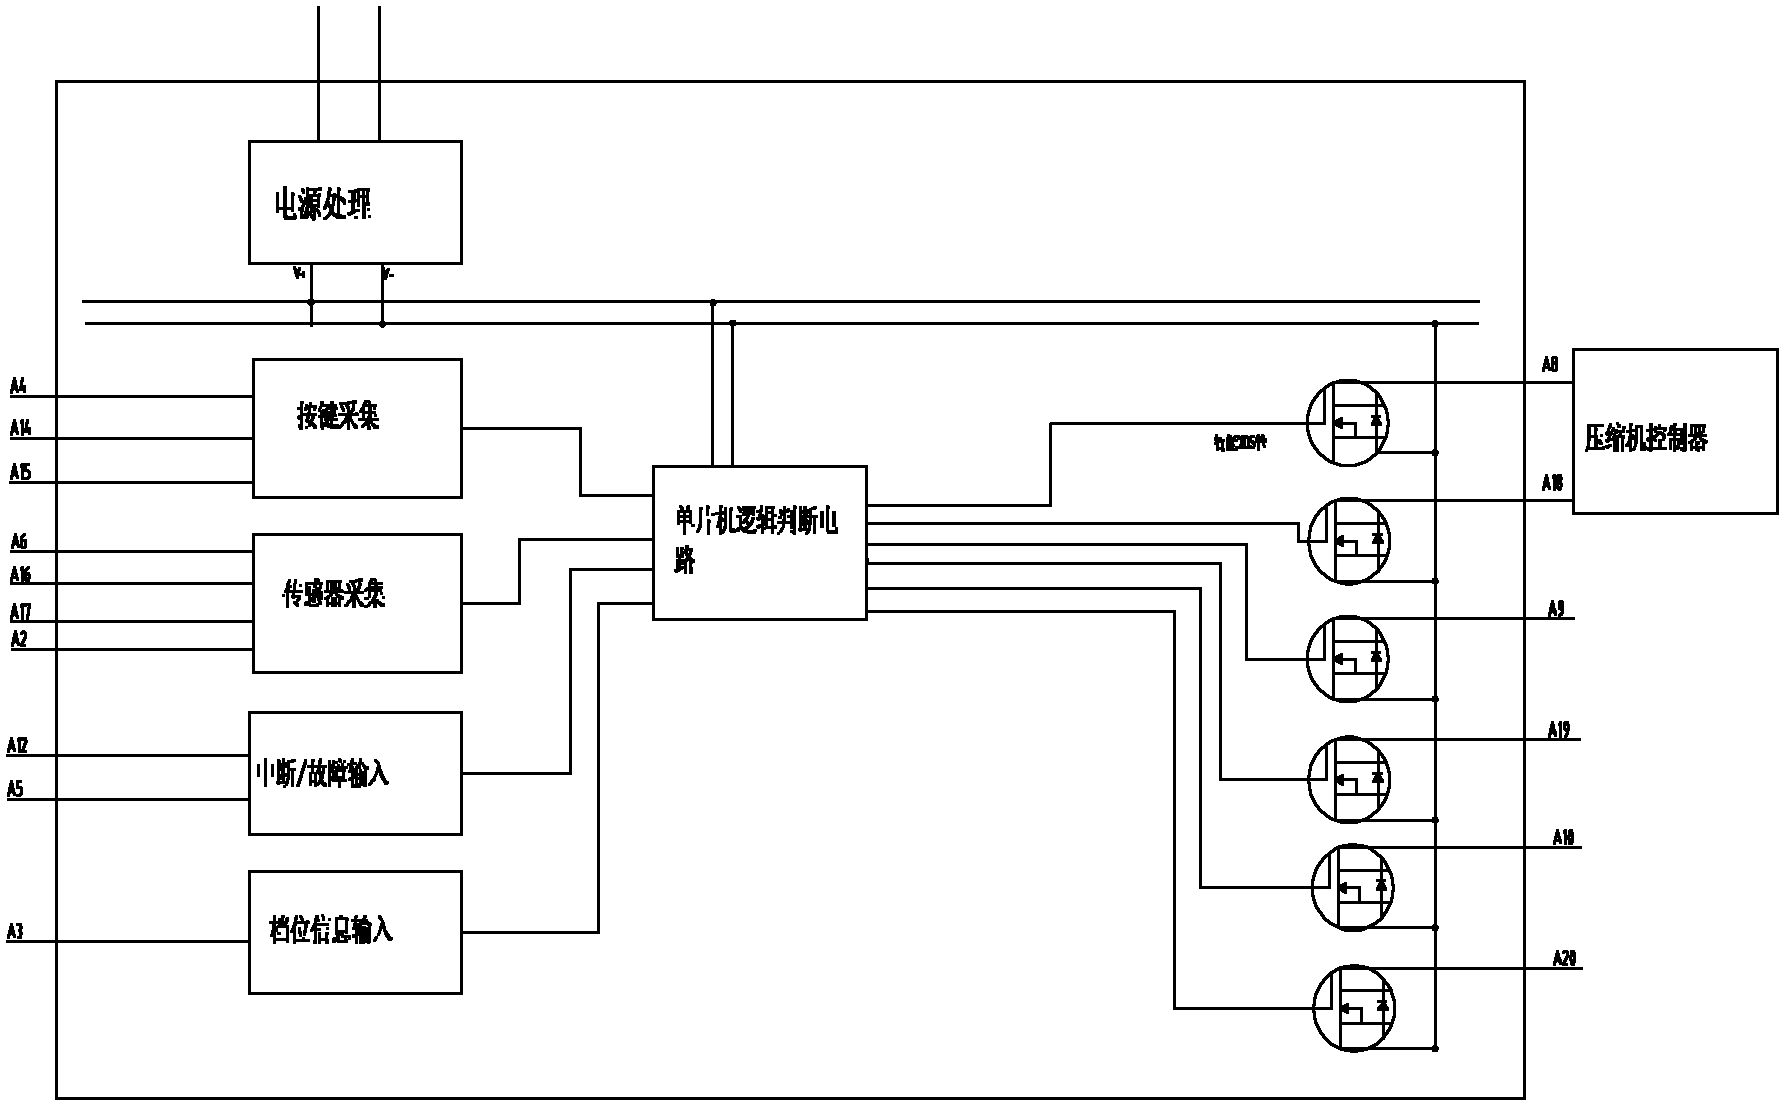 Air conditioning system of electric vehicle